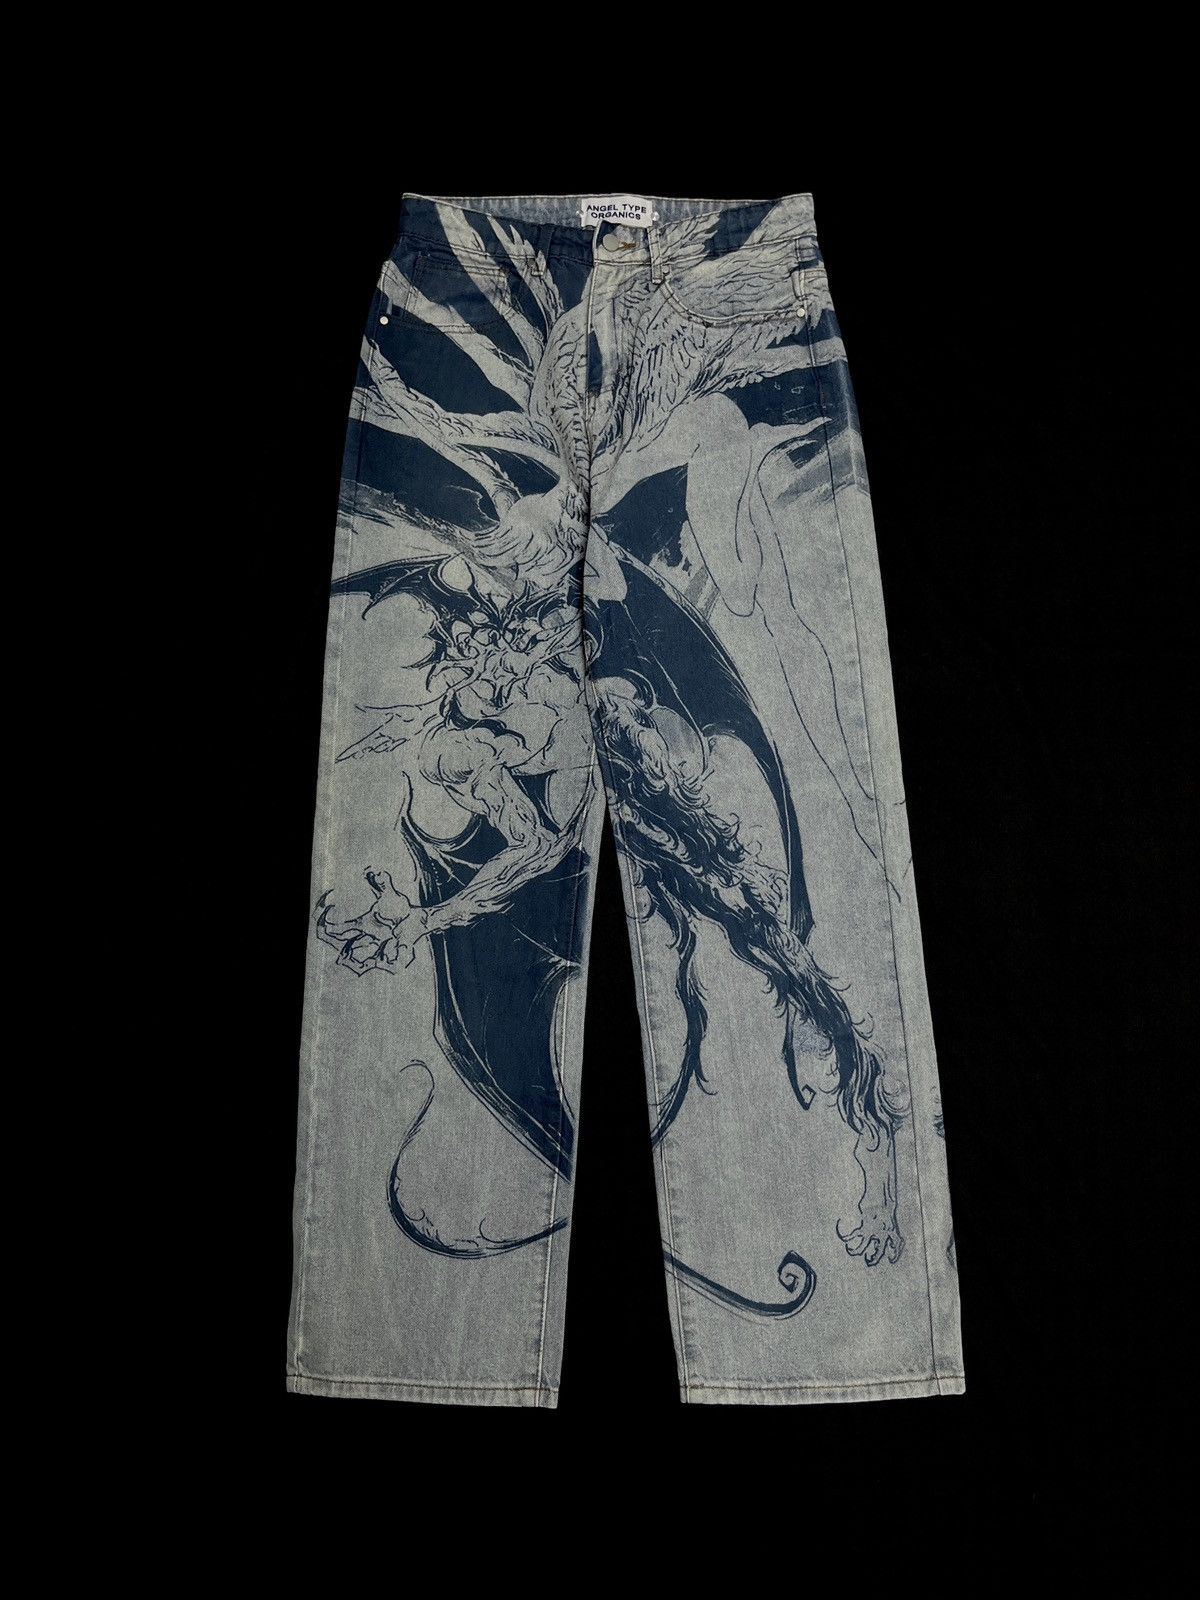 Rare - Devilman Crybaby Angel Type Organics Anime Relaxed Fit Jeans - 5